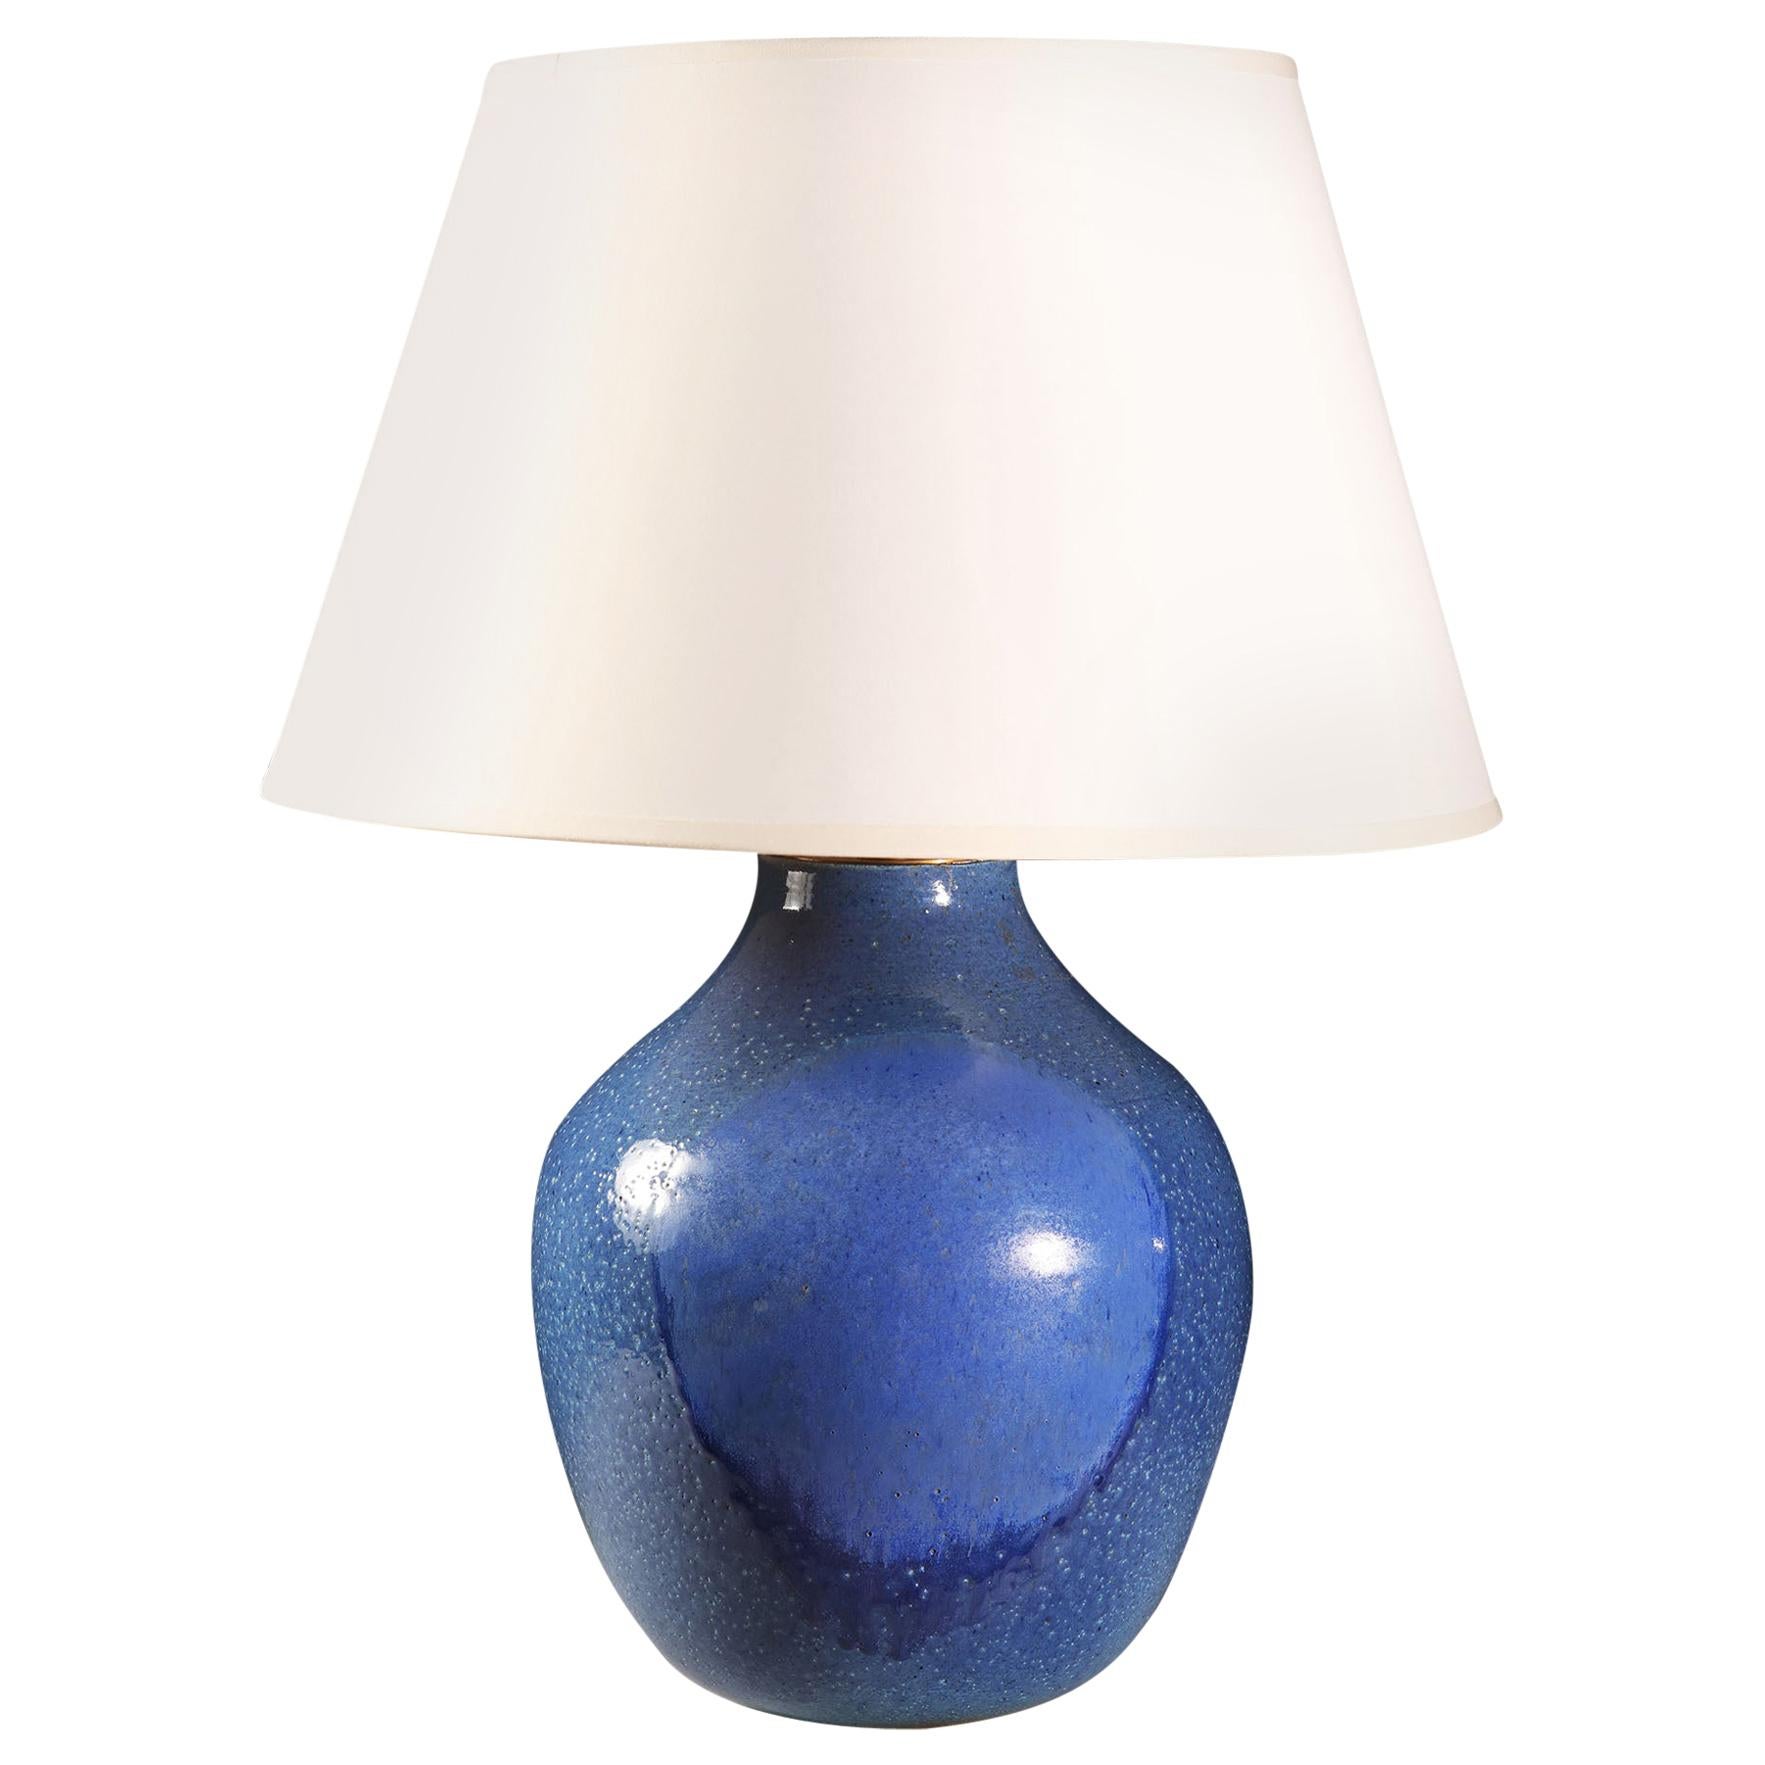 Midcentury Blue Art Pottery Vase as a Table Lamp